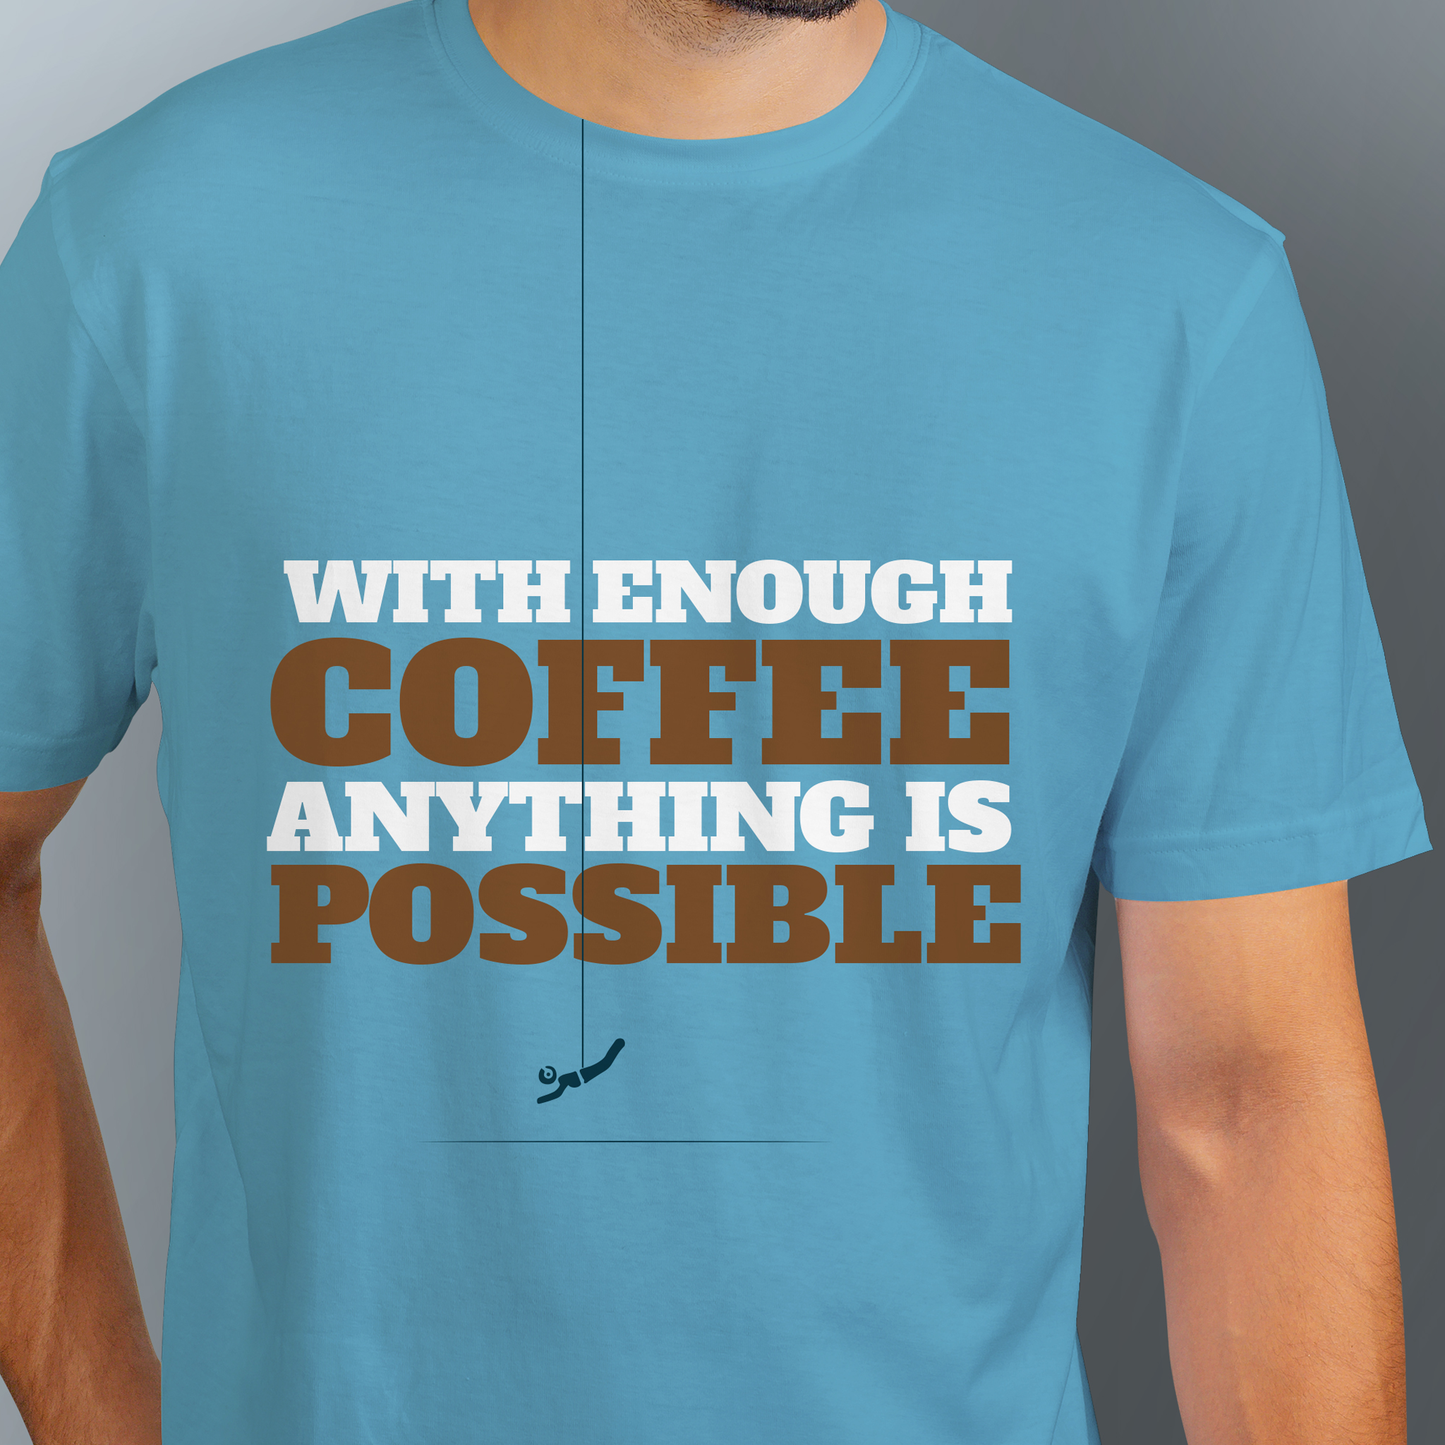 "With Enough Coffee Anything is Possible" Tee